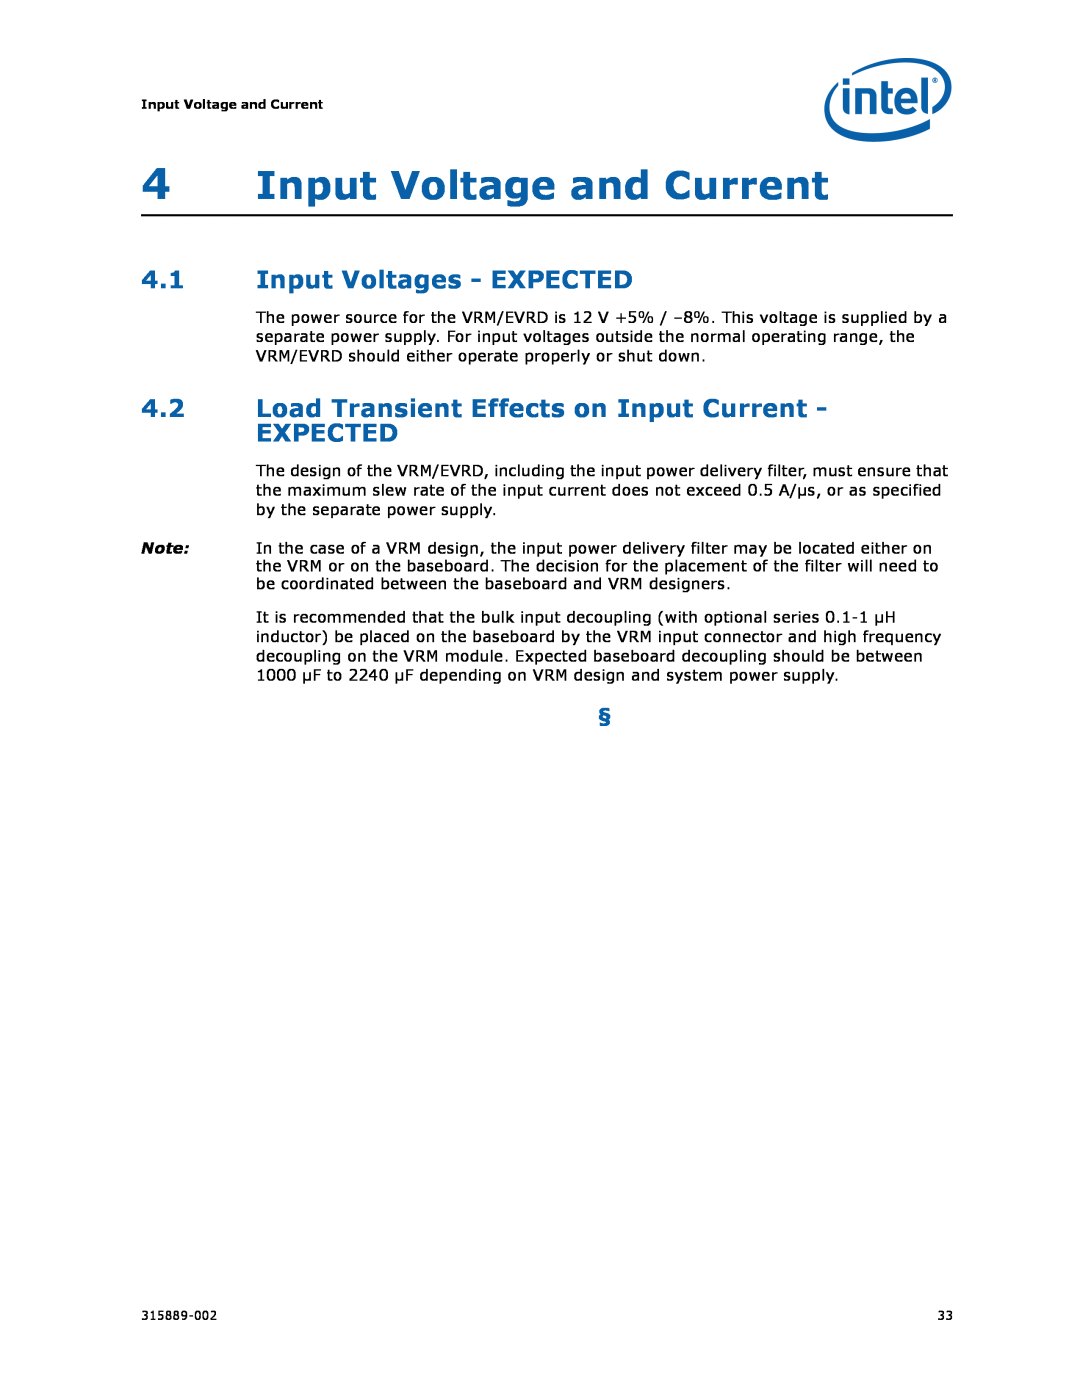 Intel 315889-002 4Input Voltage and Current, 4.1Input Voltages - EXPECTED, 4.2Load Transient Effects on Input Current 